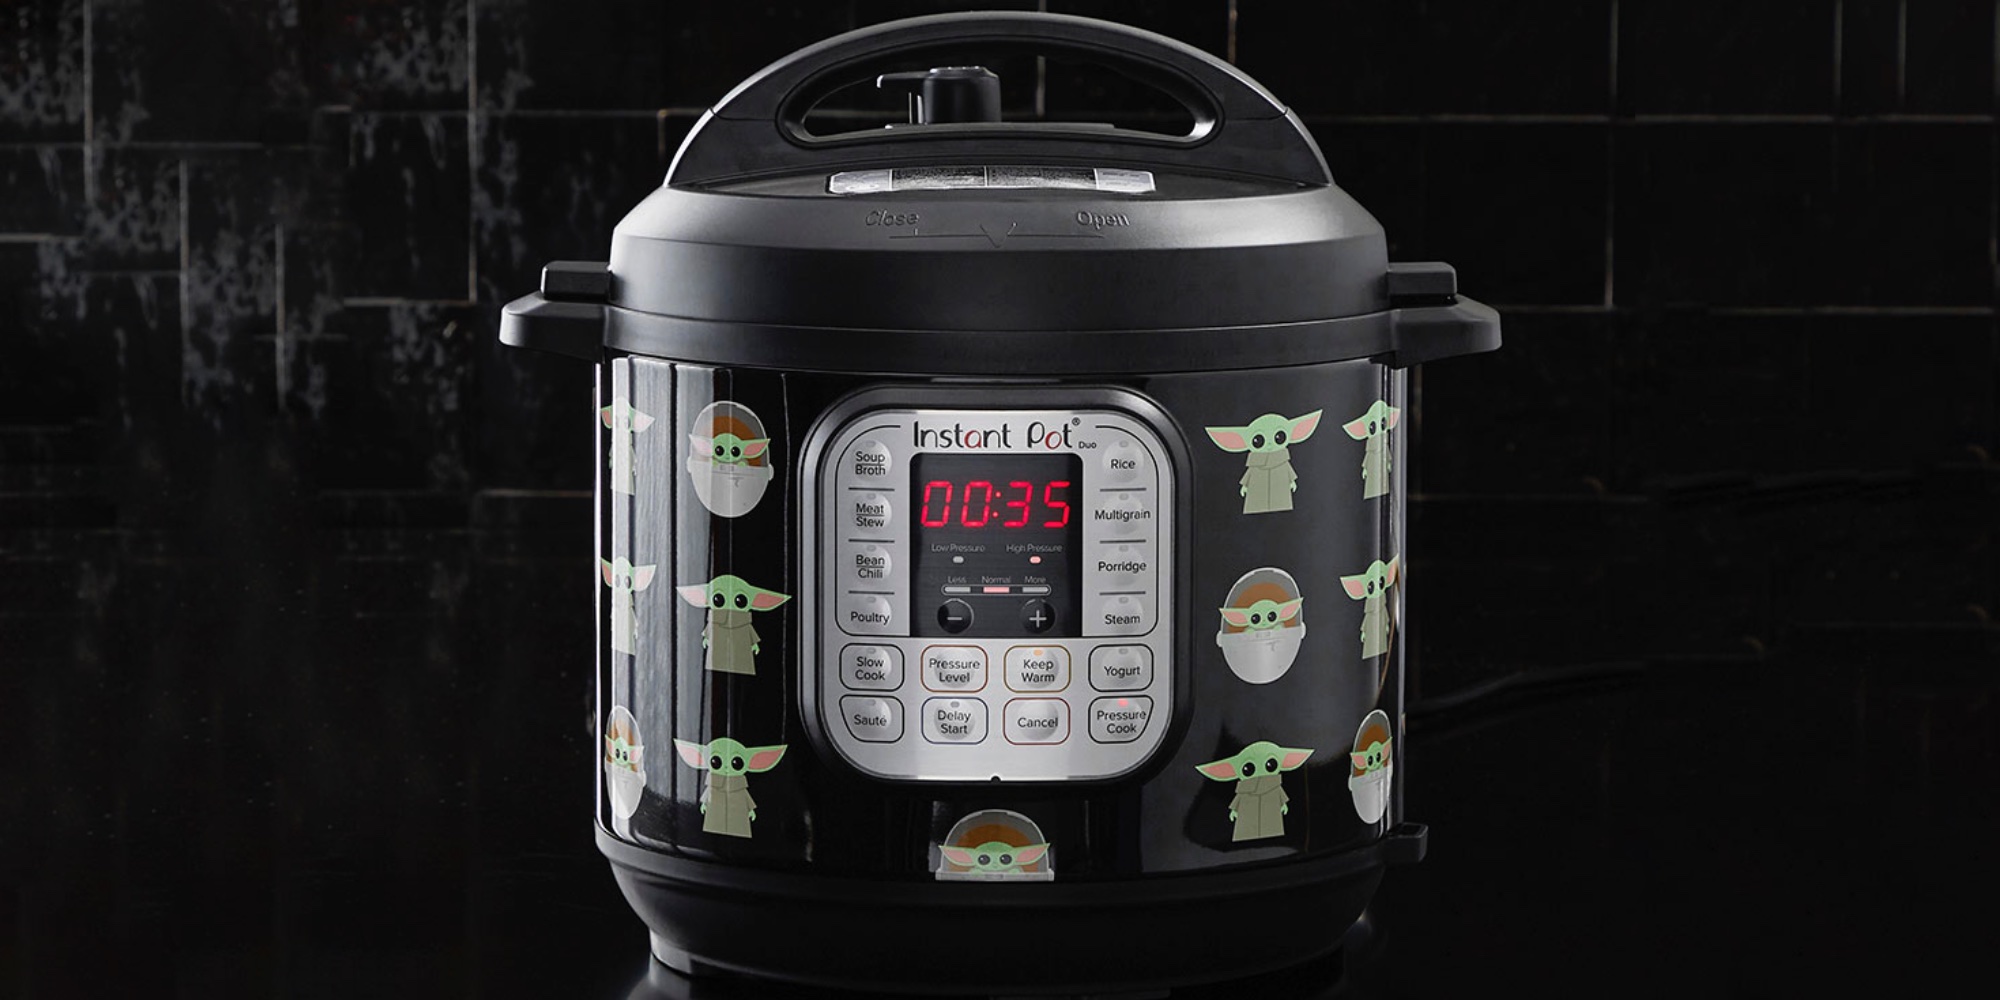 Star Wars Instant Pot 6-qt. Multi Cookers back to $60: Baby Yoda, Darth  Vader, BB-8 (Reg. $100)